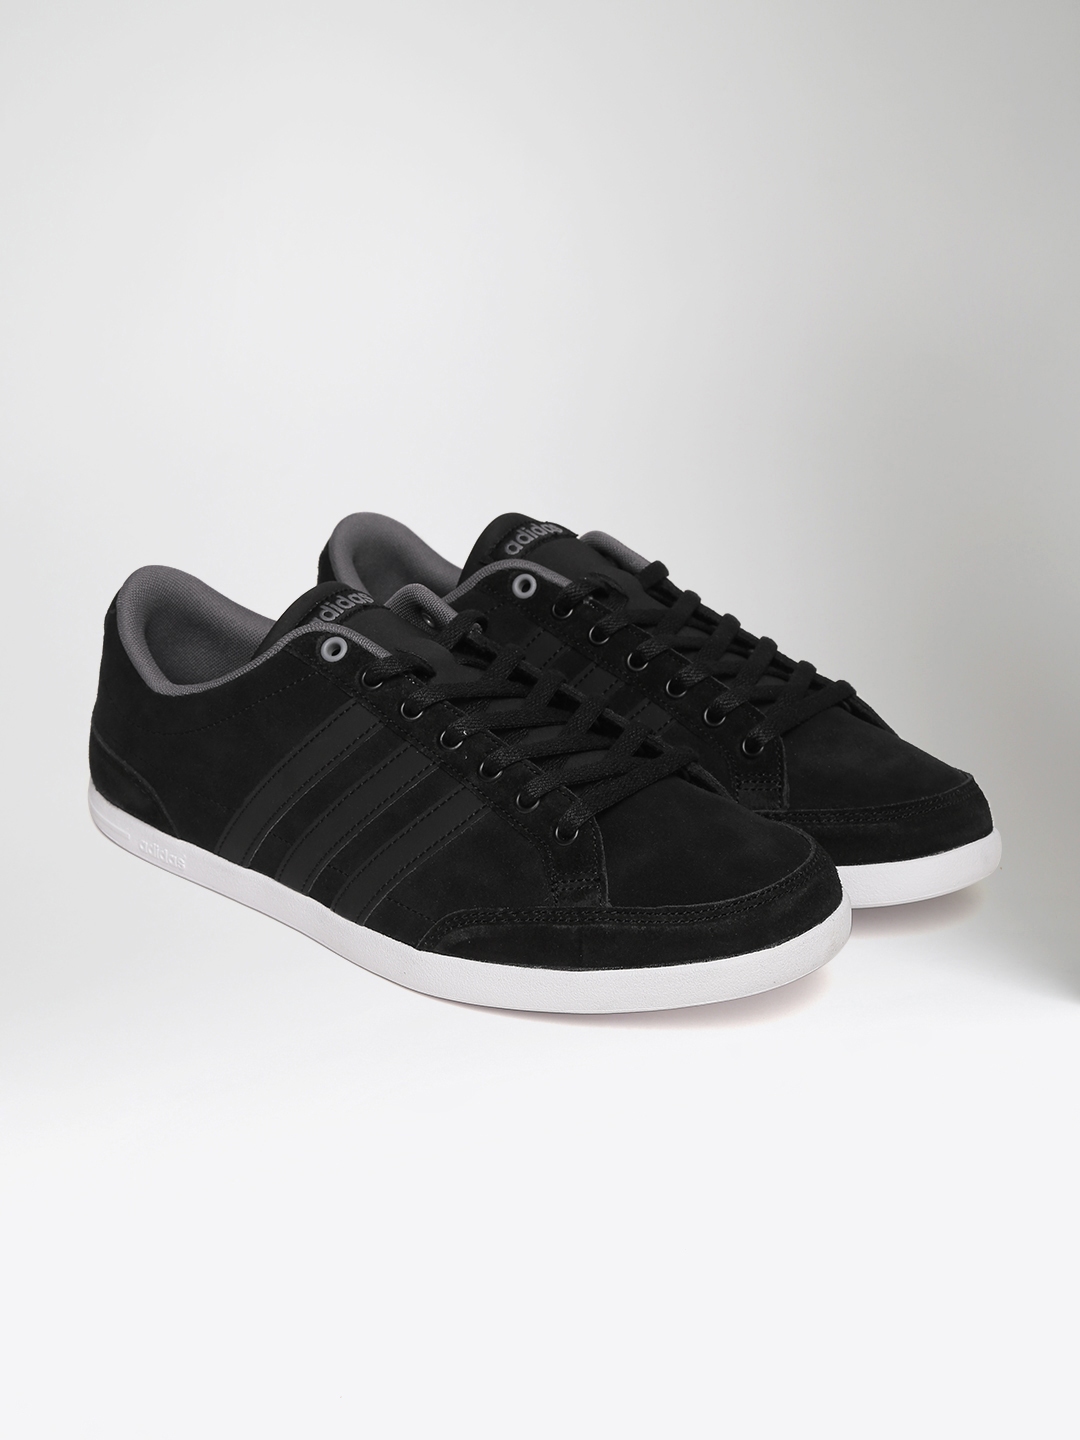 Buy ADIDAS NEO Men Black CAFLAIRE Suede Sneakers - Casual Shoes for Men ...